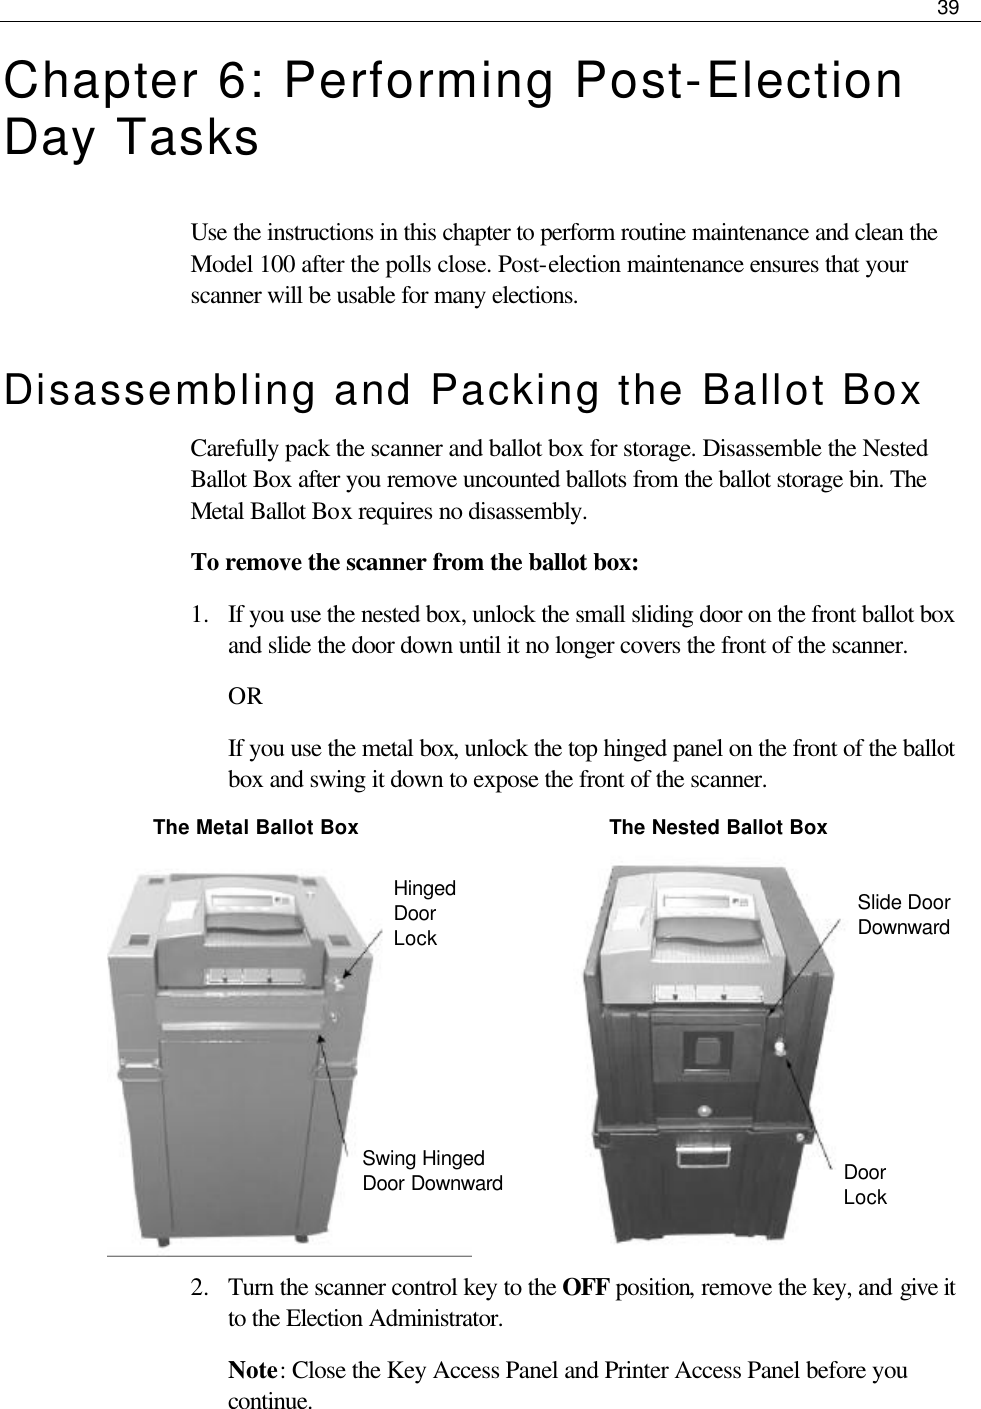     39  Chapter 6: Performing Post-Election Day Tasks Use the instructions in this chapter to perform routine maintenance and clean the Model 100 after the polls close. Post-election maintenance ensures that your scanner will be usable for many elections.  Disassembling and Packing the Ballot Box Carefully pack the scanner and ballot box for storage. Disassemble the Nested Ballot Box after you remove uncounted ballots from the ballot storage bin. The Metal Ballot Box requires no disassembly.  To remove the scanner from the ballot box: 1.  If you use the nested box, unlock the small sliding door on the front ballot box and slide the door down until it no longer covers the front of the scanner.  OR If you use the metal box, unlock the top hinged panel on the front of the ballot box and swing it down to expose the front of the scanner.   The Metal Ballot Box                The Nested Ballot Box            2.  Turn the scanner control key to the OFF position, remove the key, and give it to the Election Administrator. Note: Close the Key Access Panel and Printer Access Panel before you continue.   Hinged Door Lock Swing Hinged Door Downward  Slide Door Downward Door Lock 